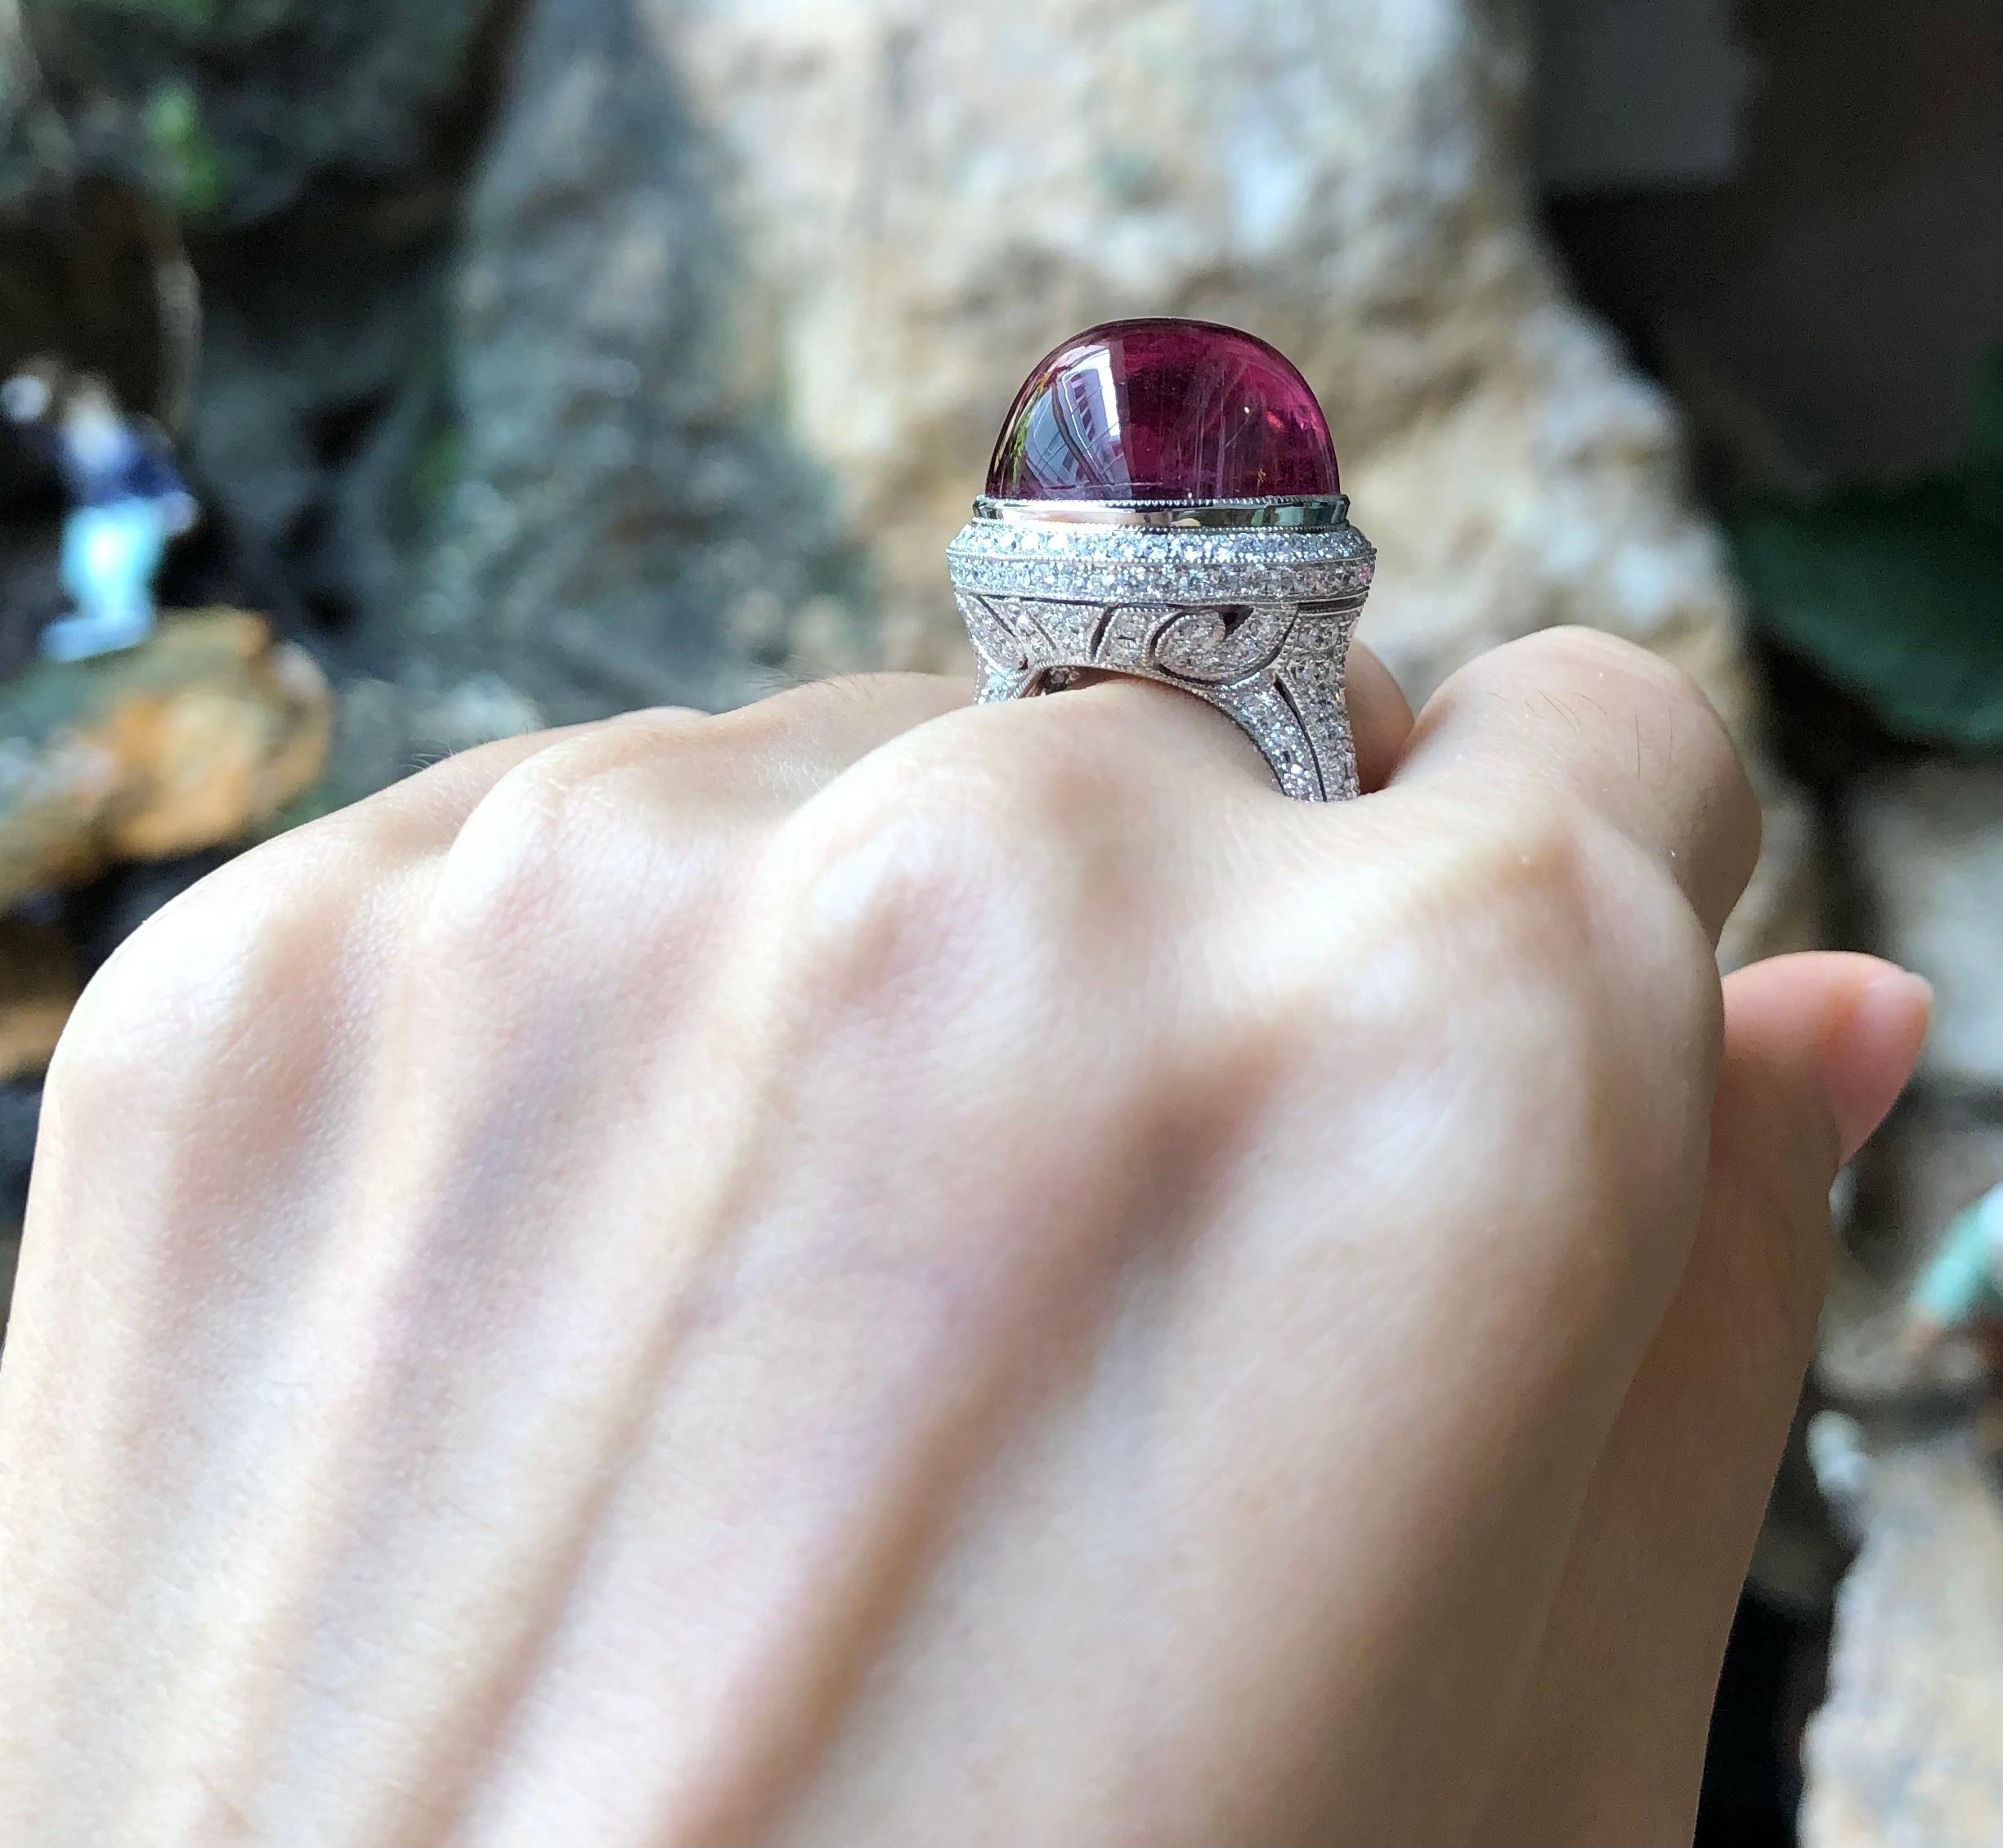 Cabochon Rubellite 34.57 carats with Diamond 1.85 carats Ring set in 18 Karat White Gold Settings

Width:  2.0 cm 
Length:  2.0 cm
Ring Size: 513
Total Weight: 19.05 grams

